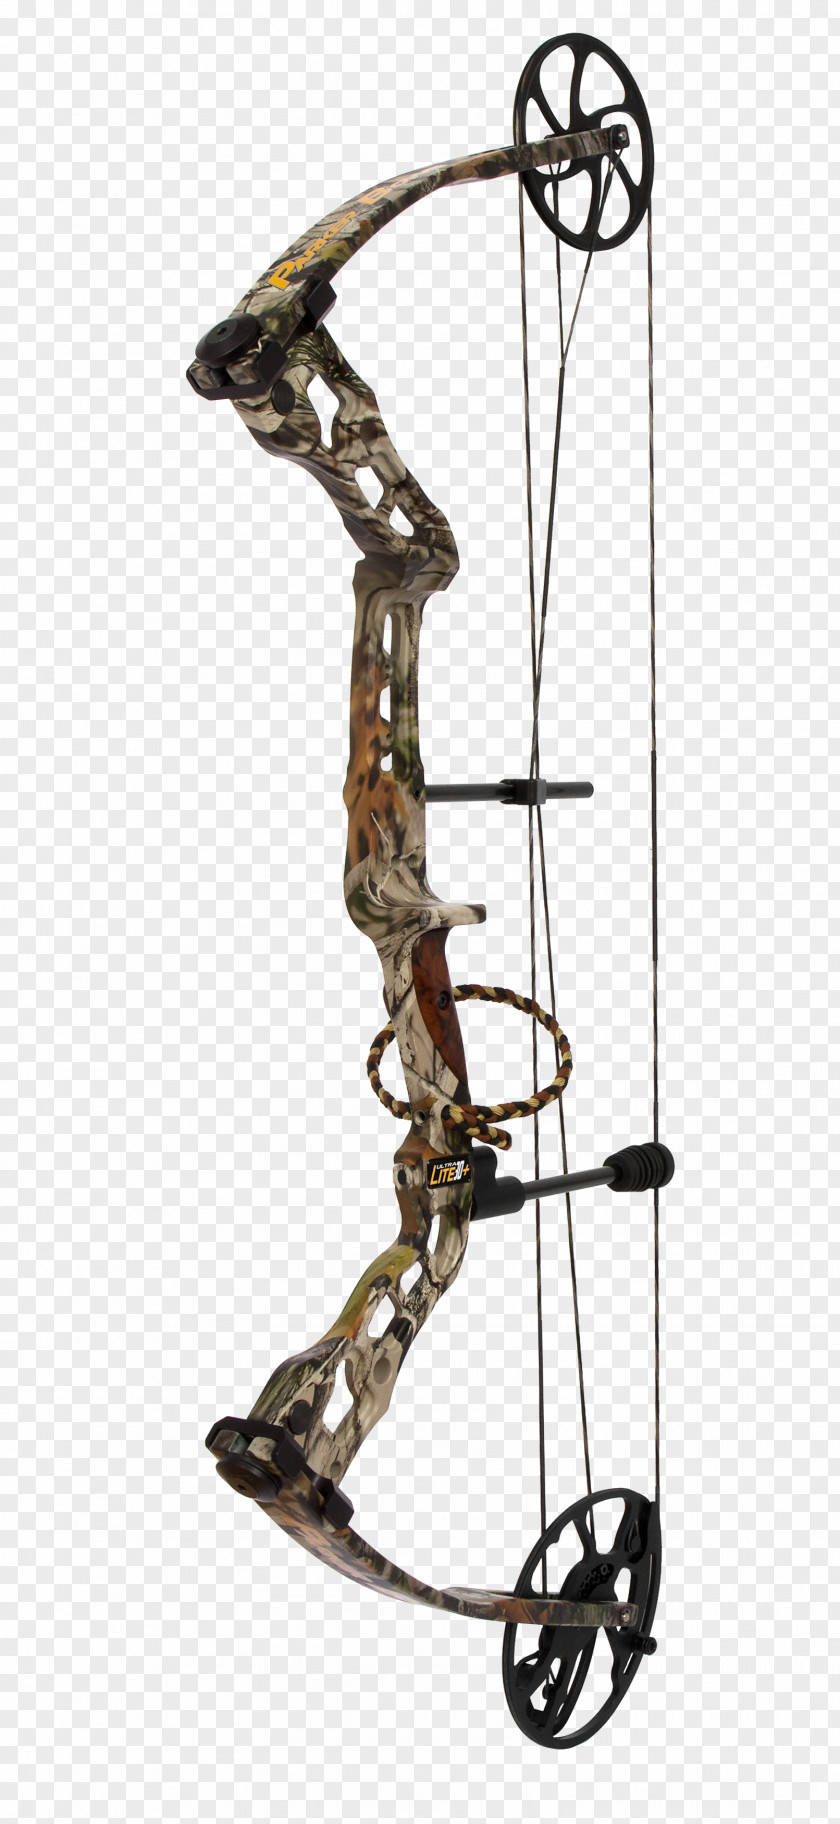 Compound Bows Bow And Arrow Bear Archery Bowhunting PNG